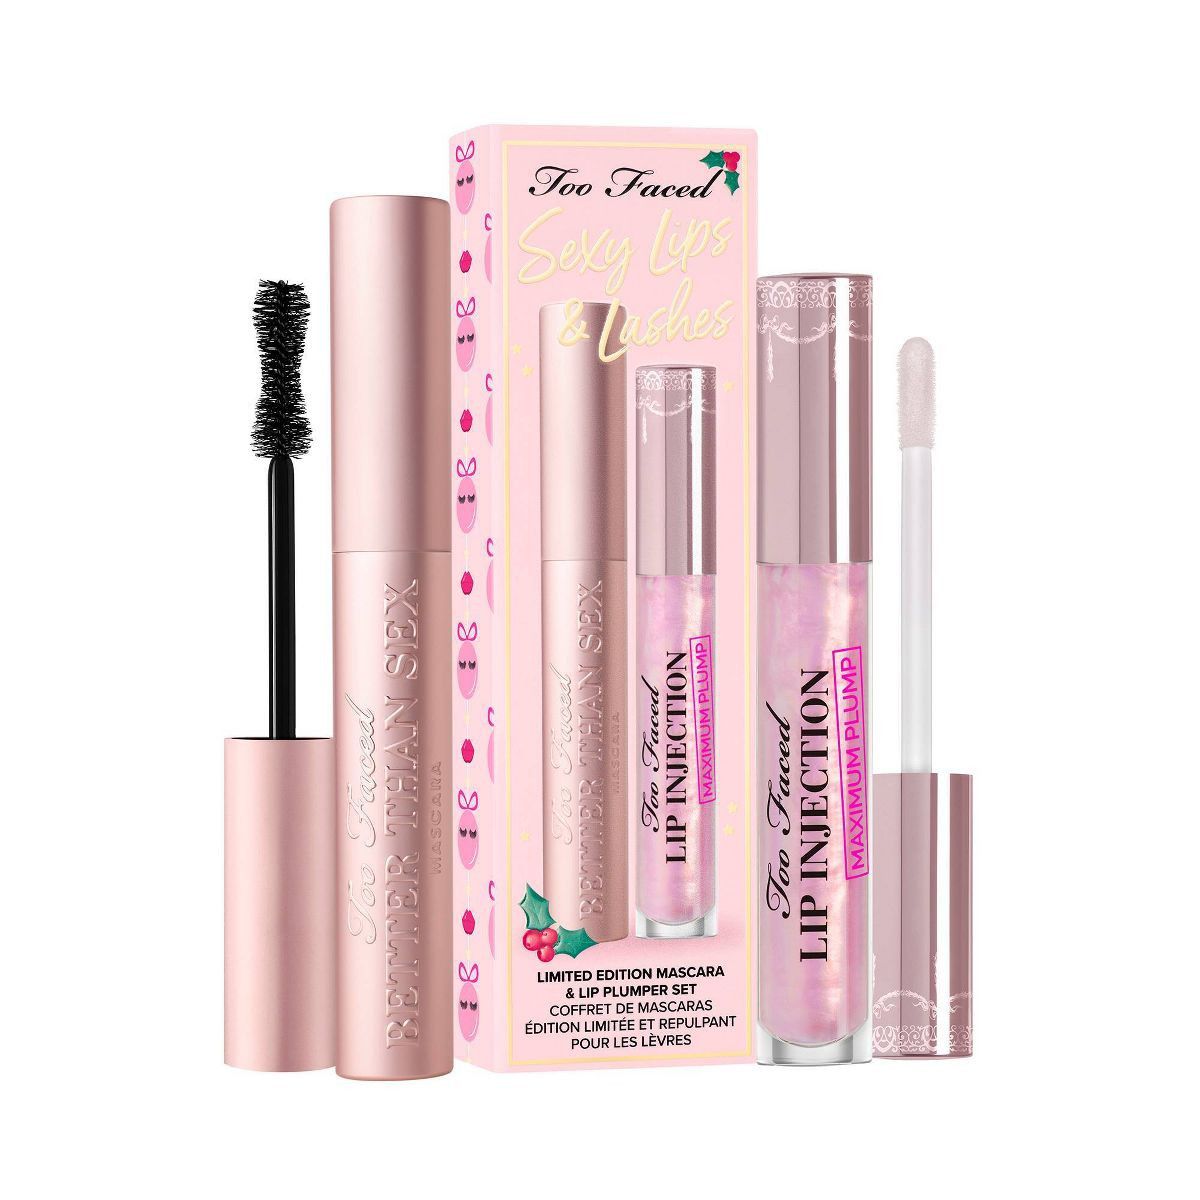 Too Faced Sexy Lips & Lashes Limited Edition Mascara & Lip Plumper Set - 0.41oz/2pc - Ulta Beauty | Target